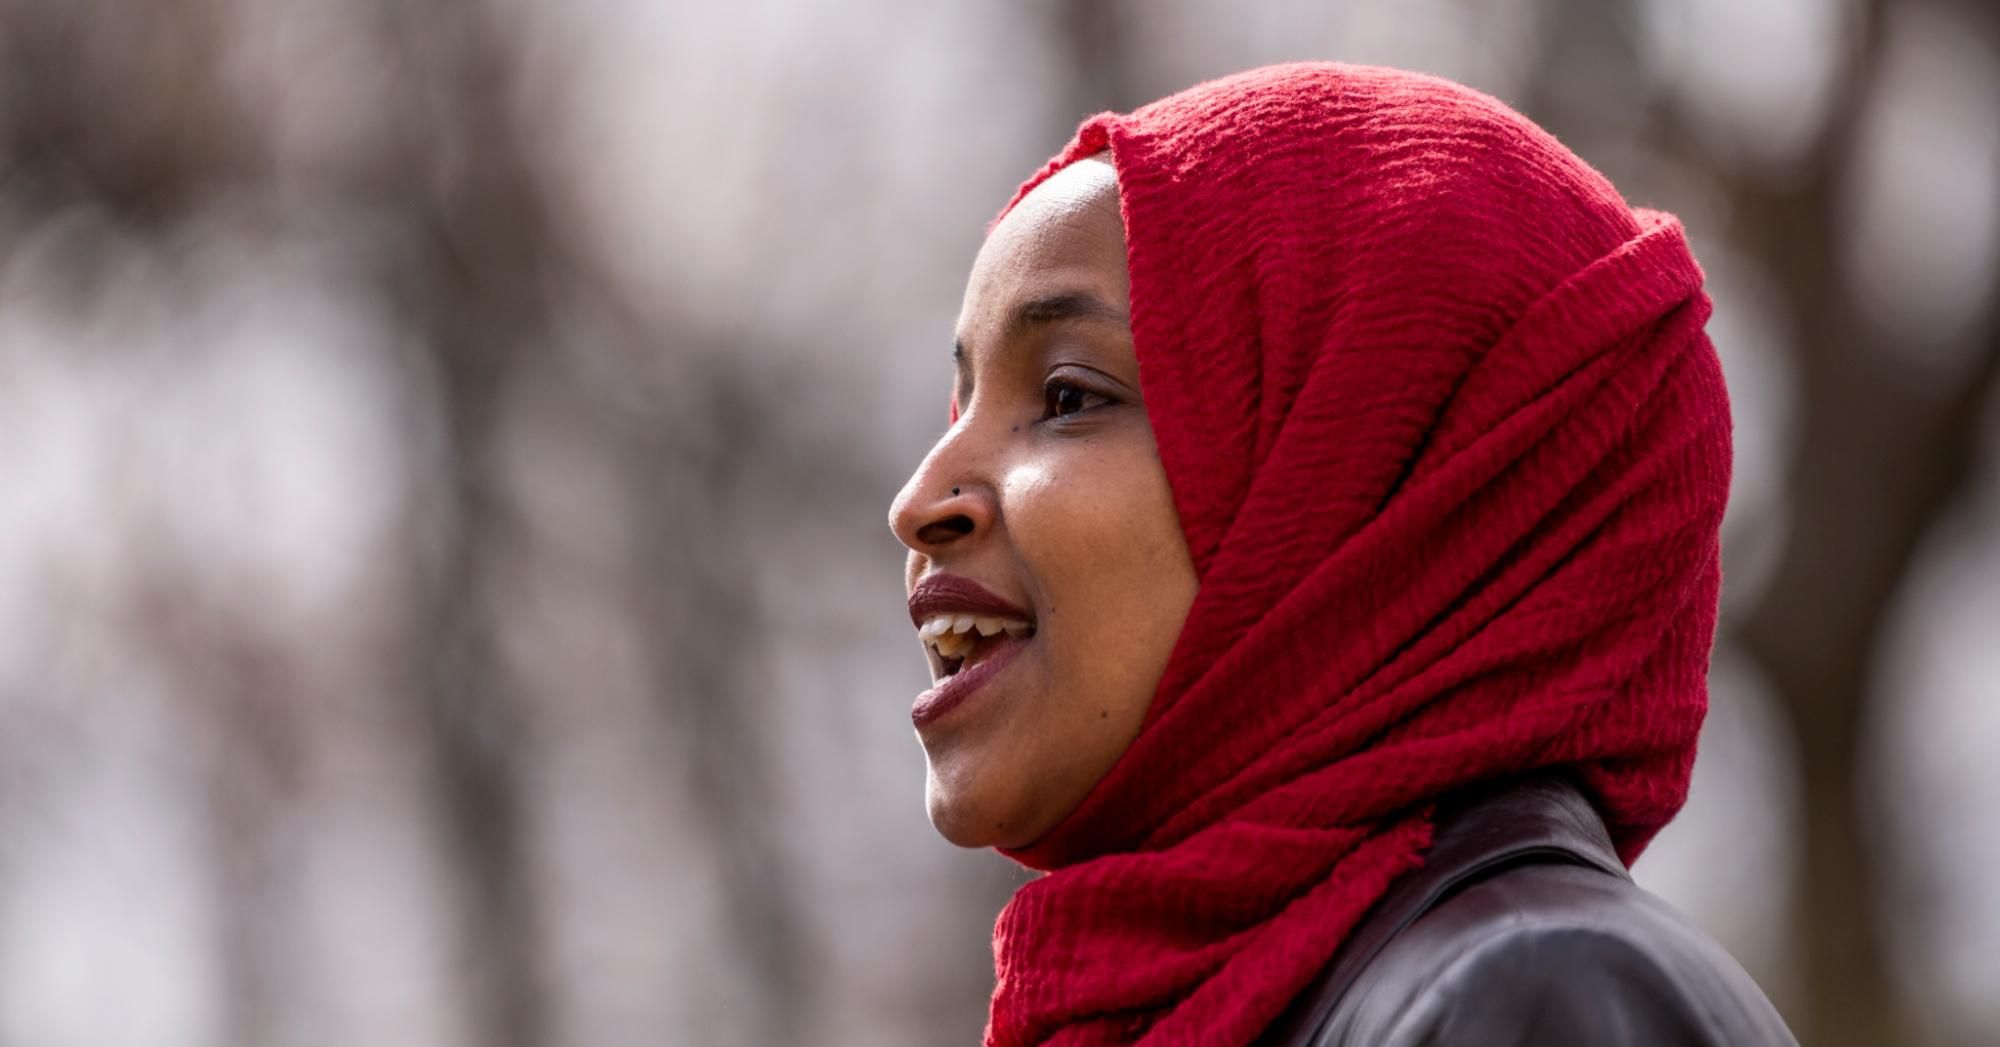 Rep. Ilhan Omar (D-Minn.) speaks during a press conference at a memorial for Daunte Wright on April 20, 2021 in Brooklyn Center, Minnesota. (Photo: Stephen Maturen via Getty Images)